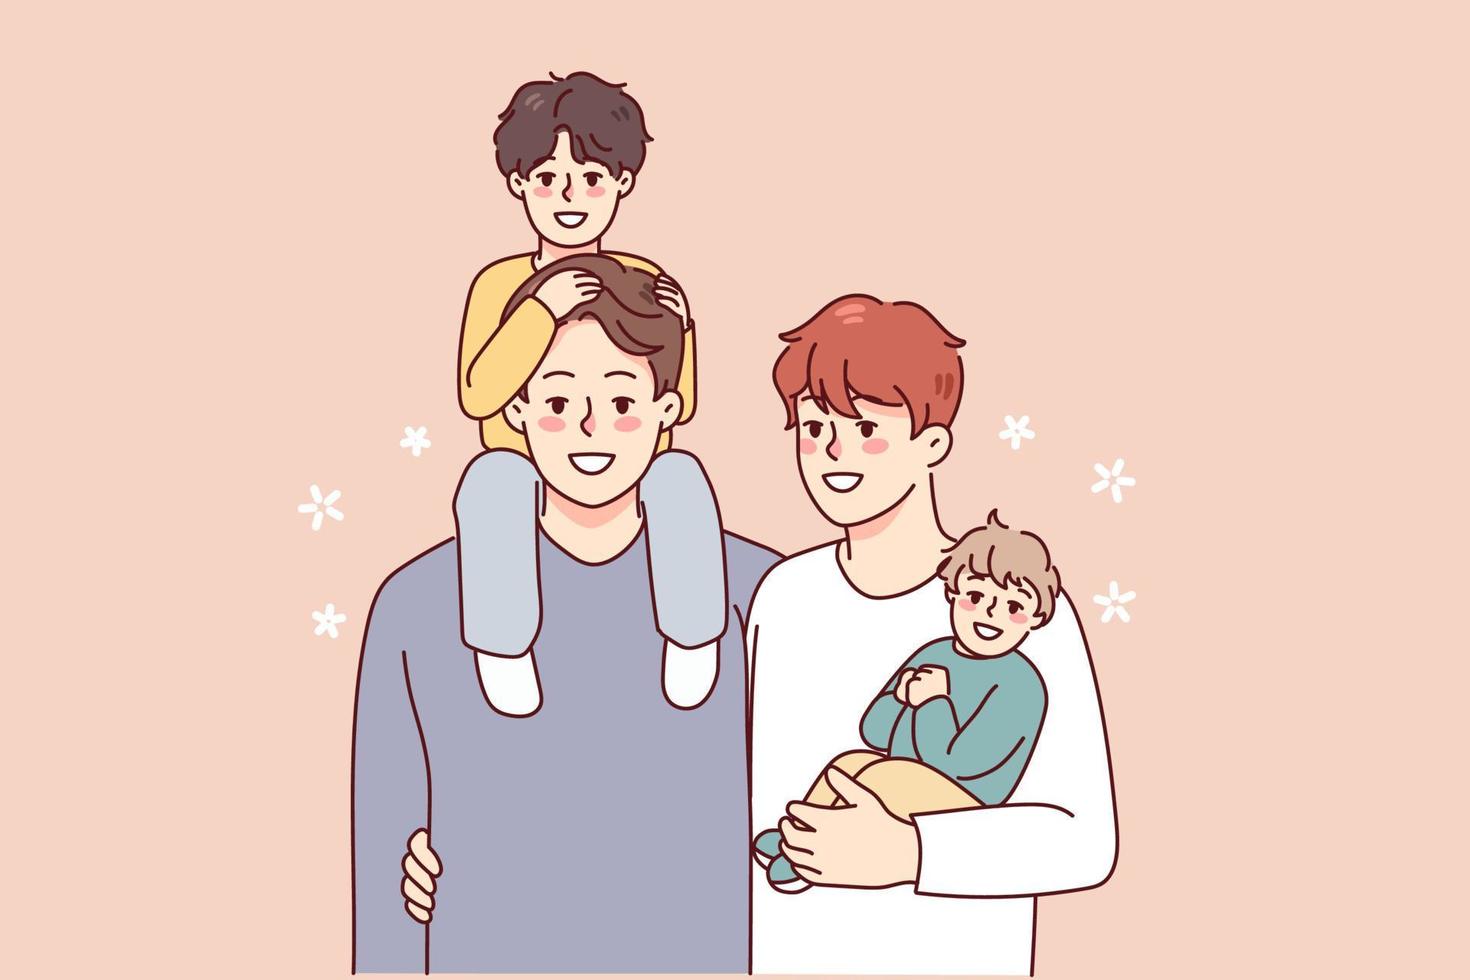 Happy homosexual men with small kids establish family. Smiling gay couple adopting children. LGBTQ parents. Vector illustration.